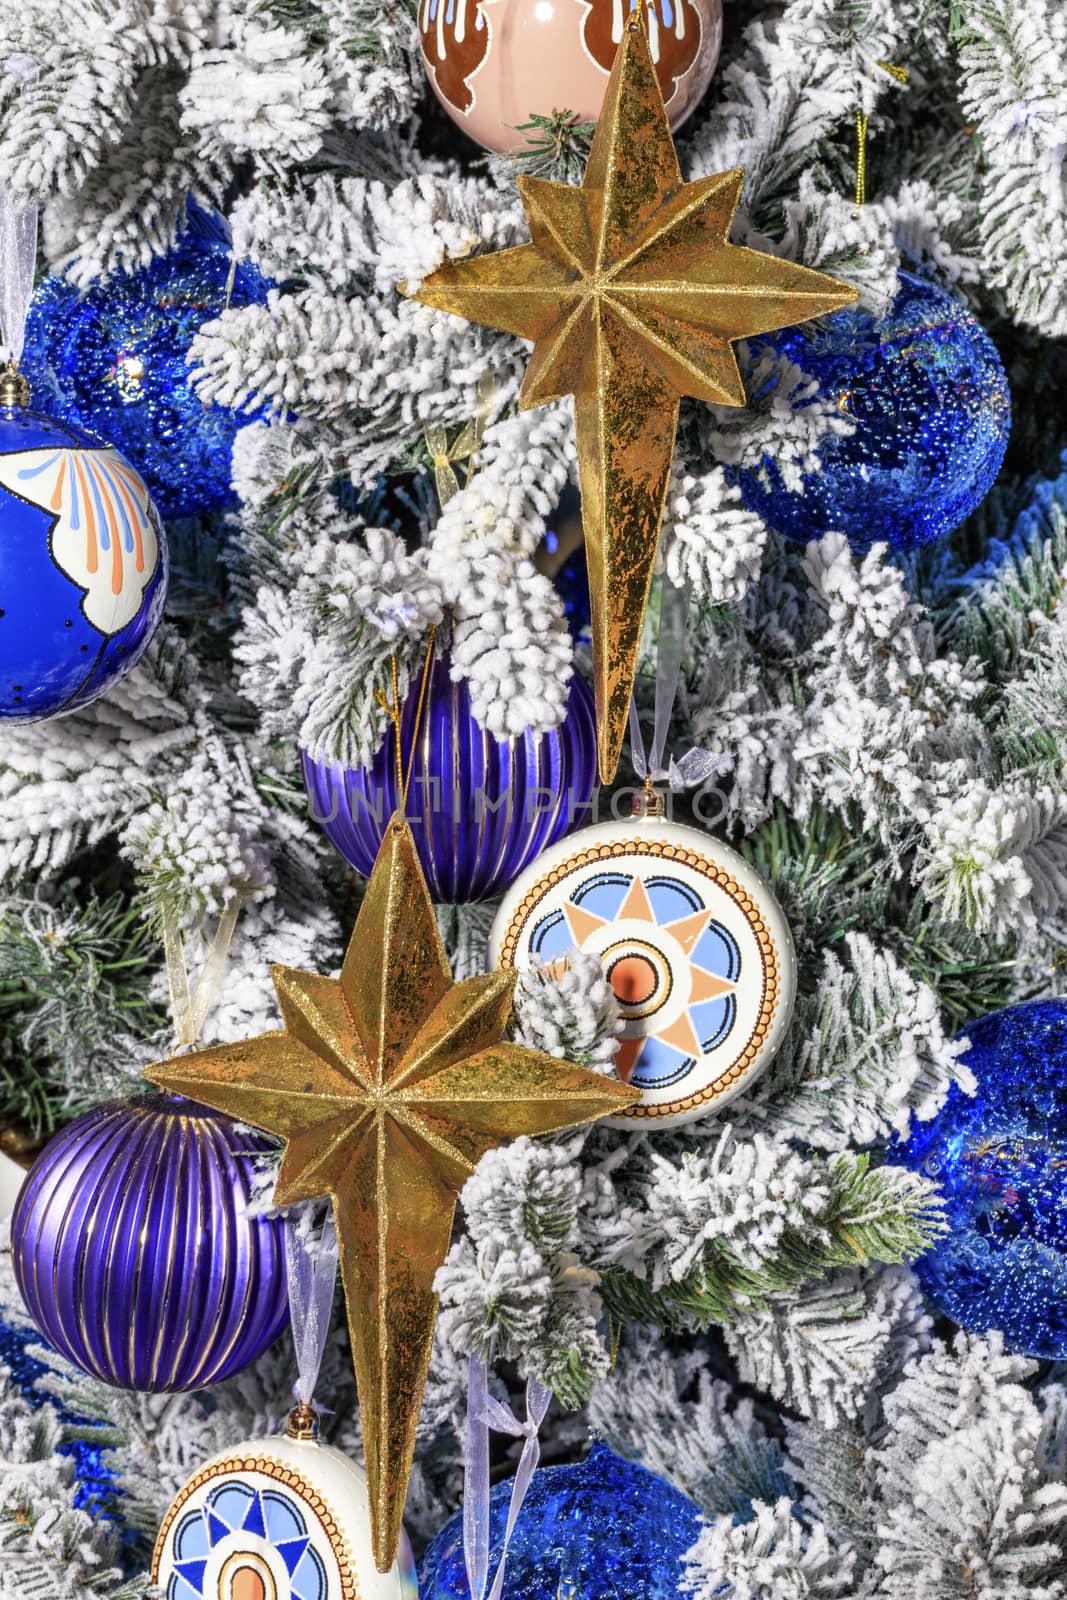 Collection of gold stars, blue Christmas balls, baubles for the Christmas tree, a spheres on the snowy branches of the Christmas tree.